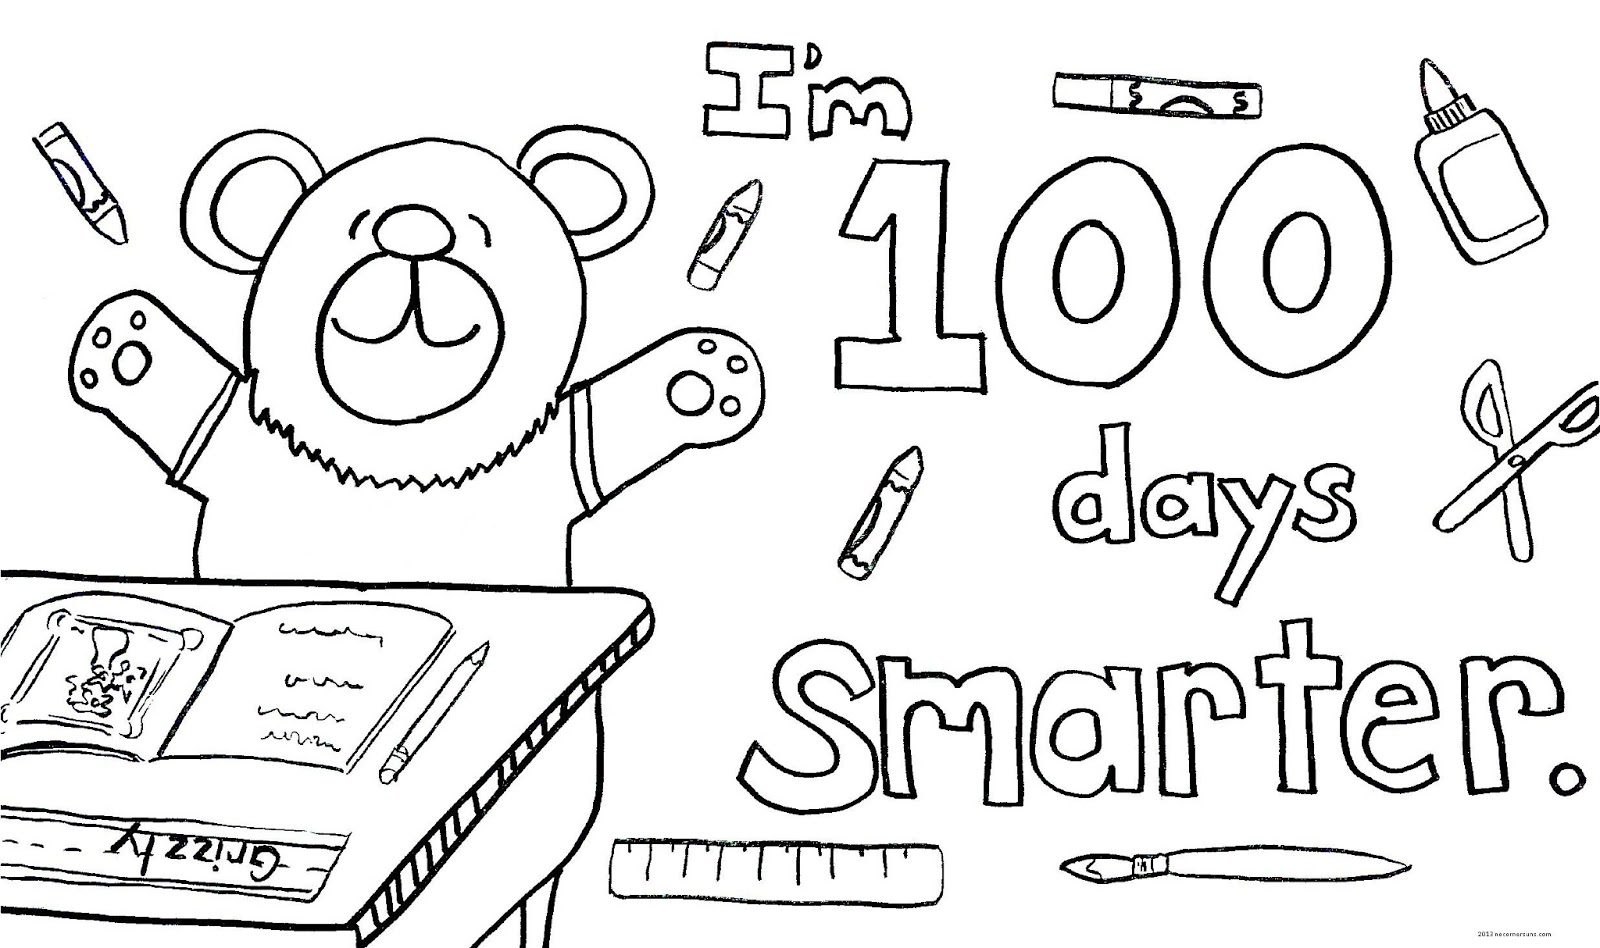 5 Best Images Of 100 Day Celebration Coloring Printables Free 100 